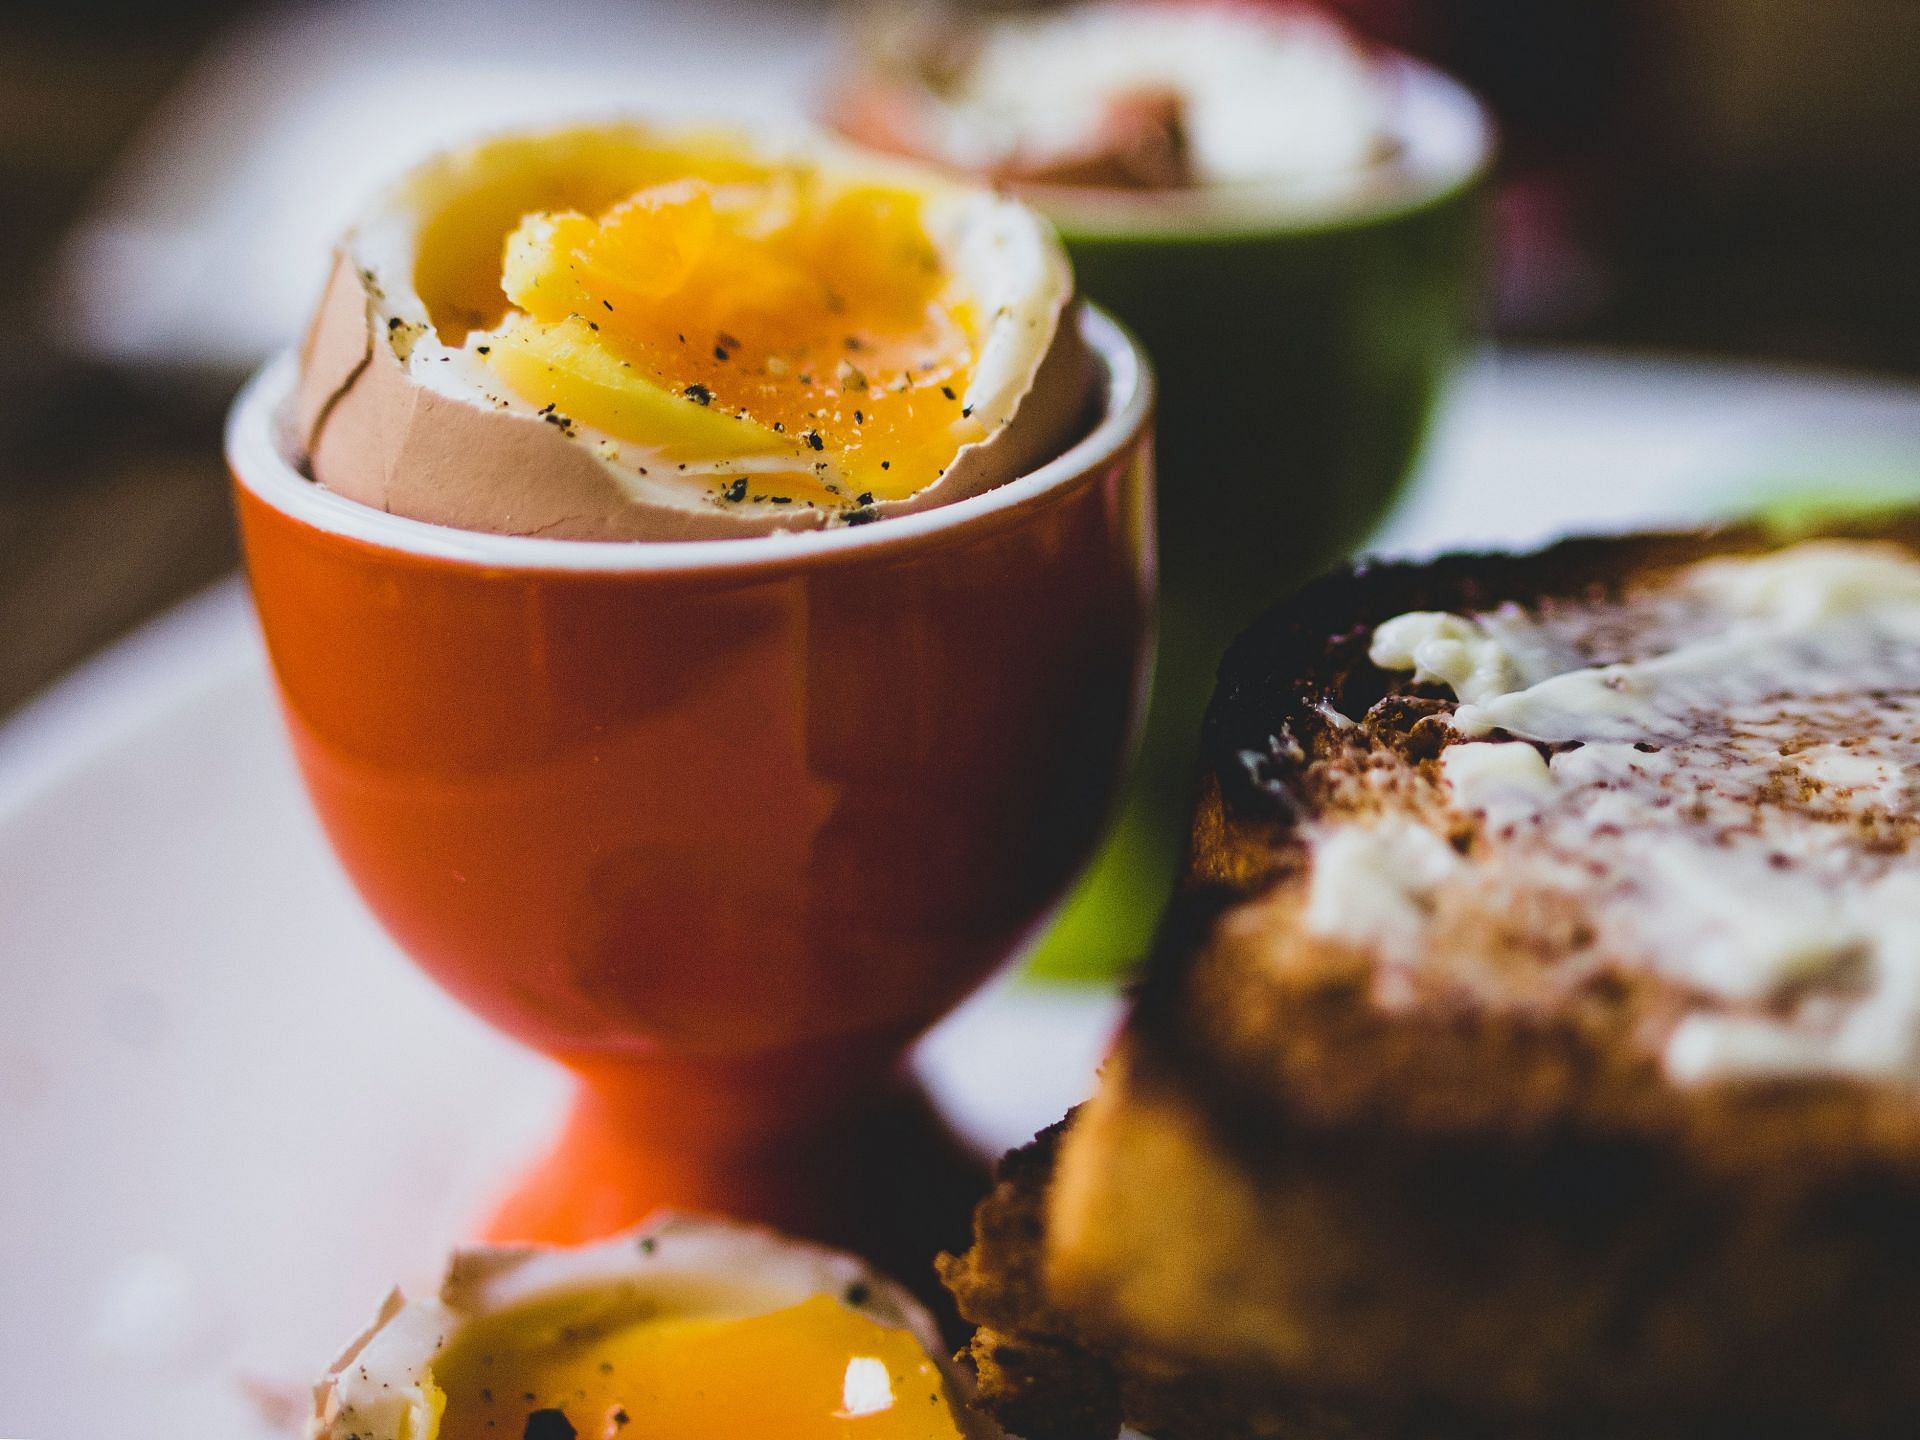 Hard-boiled eggs with whole grain toast make a protein-packed snack (Image via Pexesl)